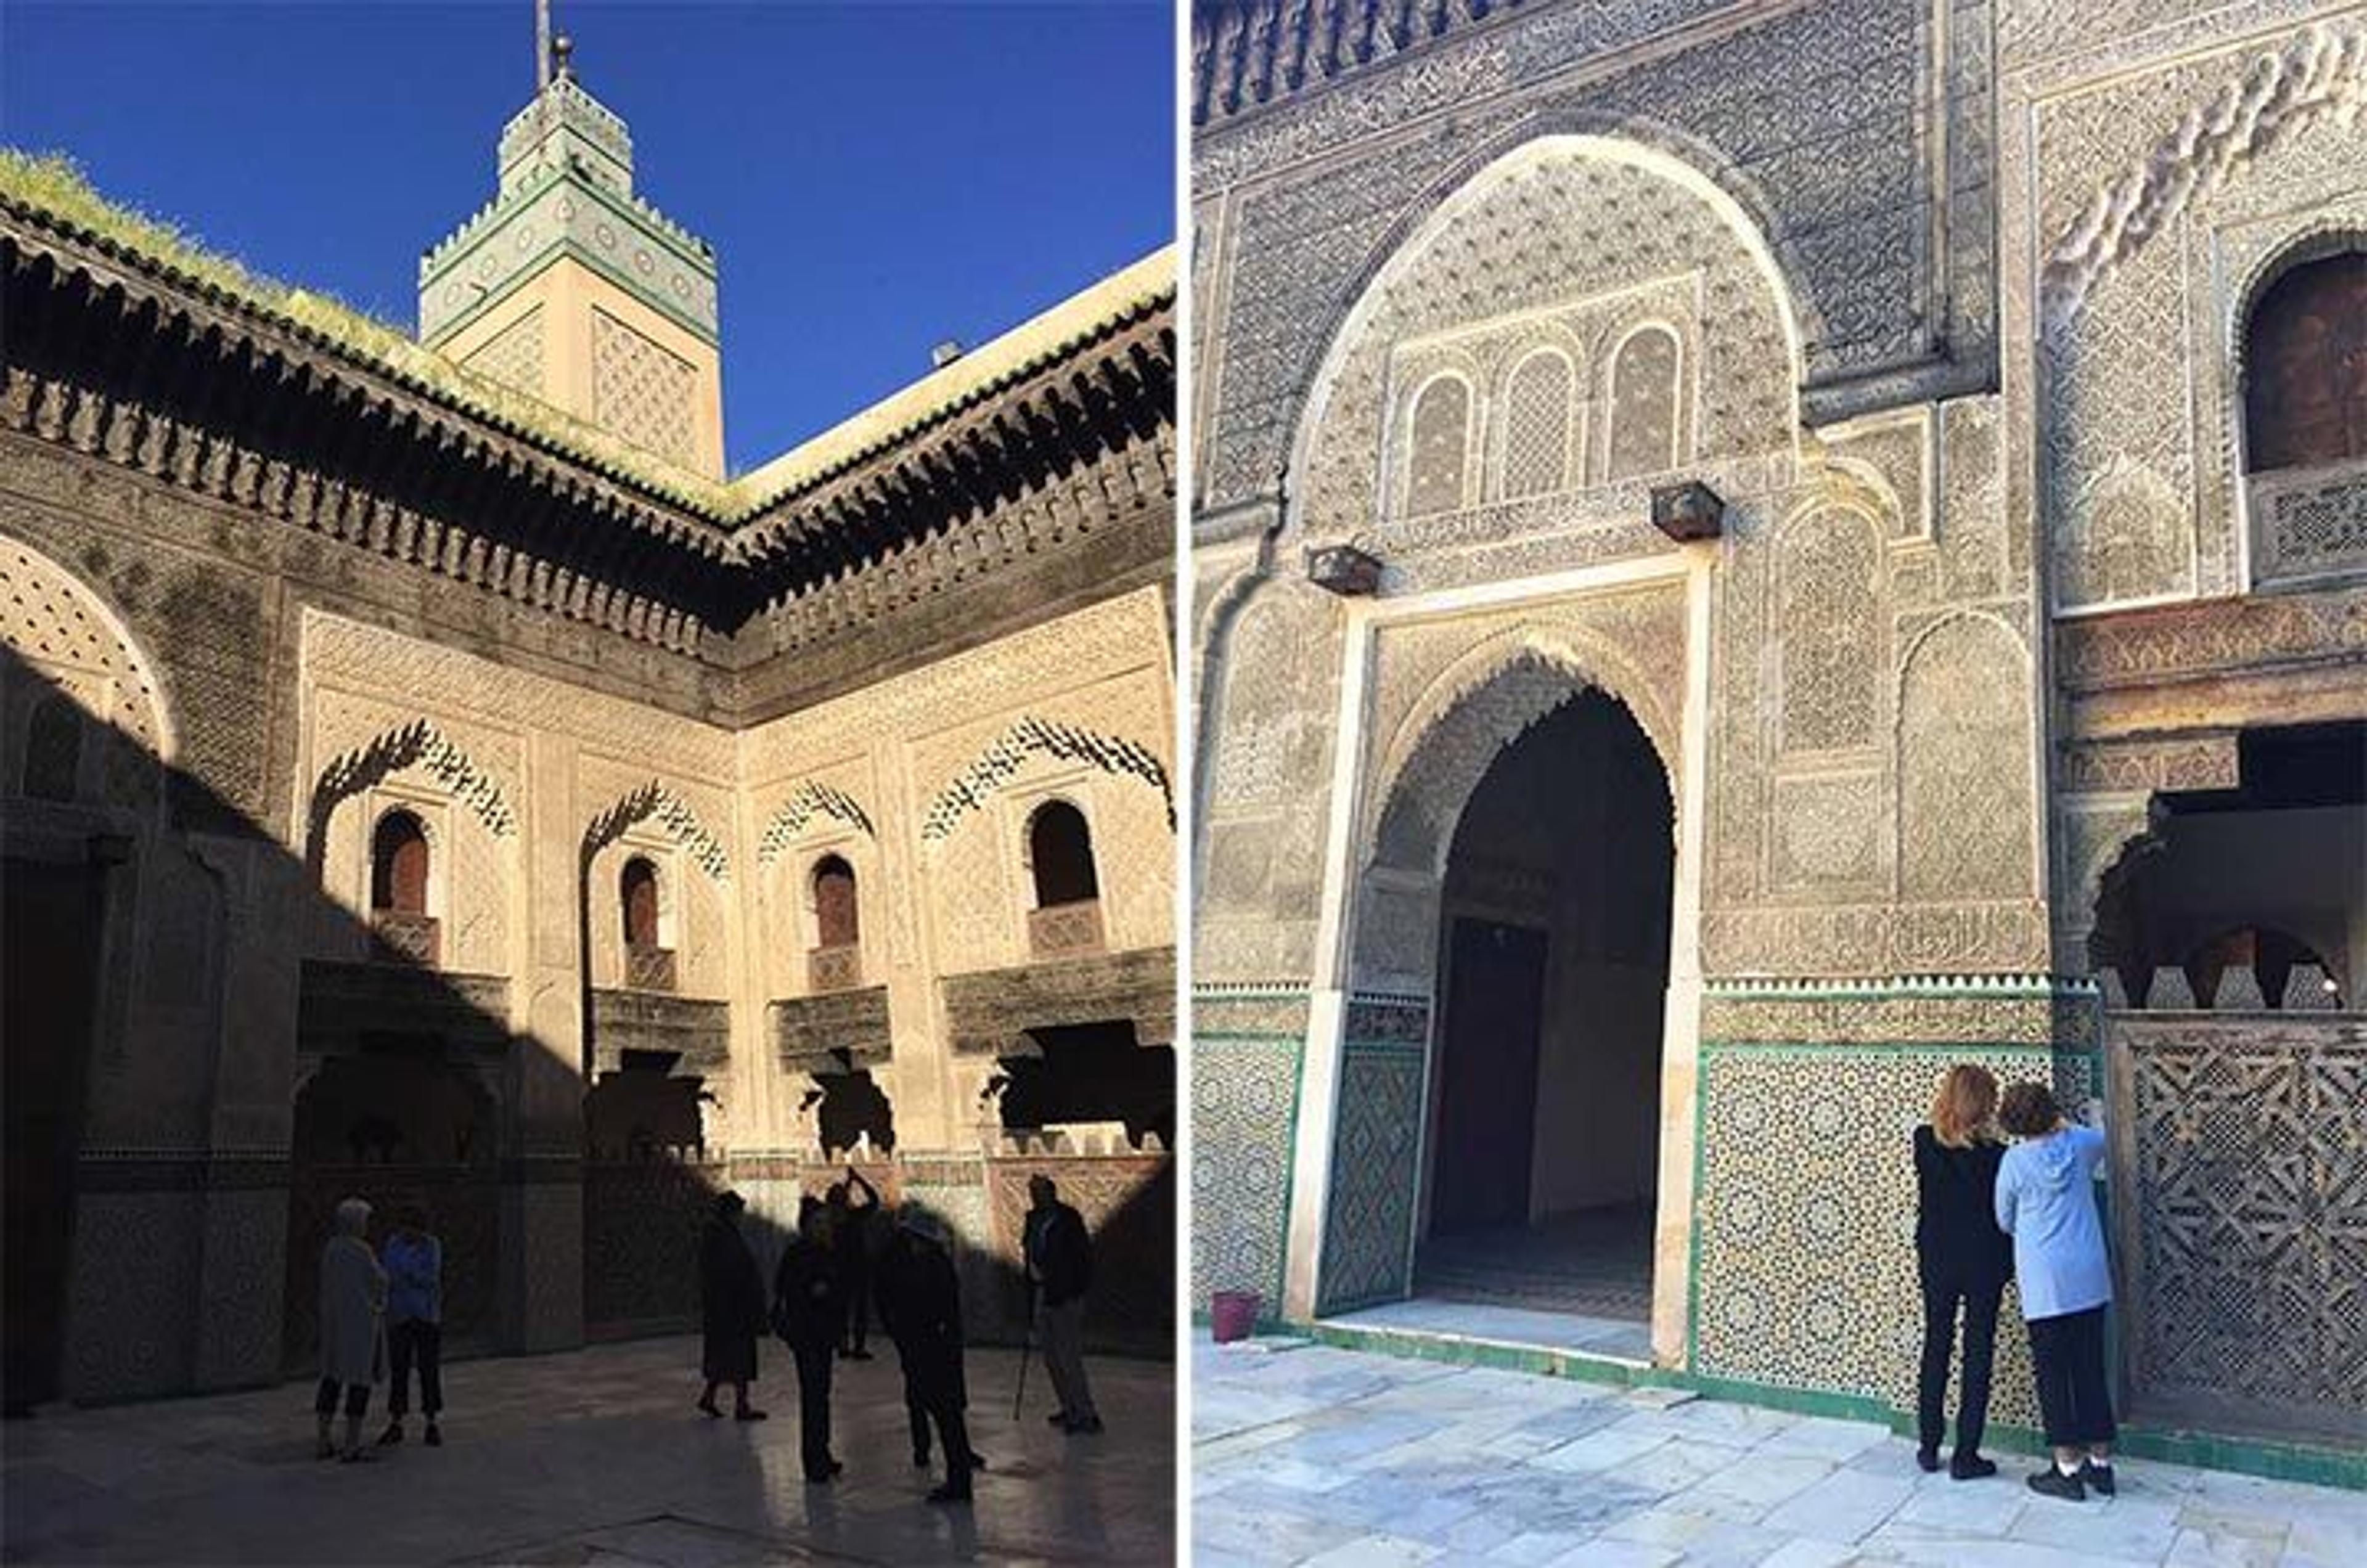 Left: Courtyard of the Bou Inania Medersa, 14th century. Right: Participants marvel at the intricate mosaic tilework